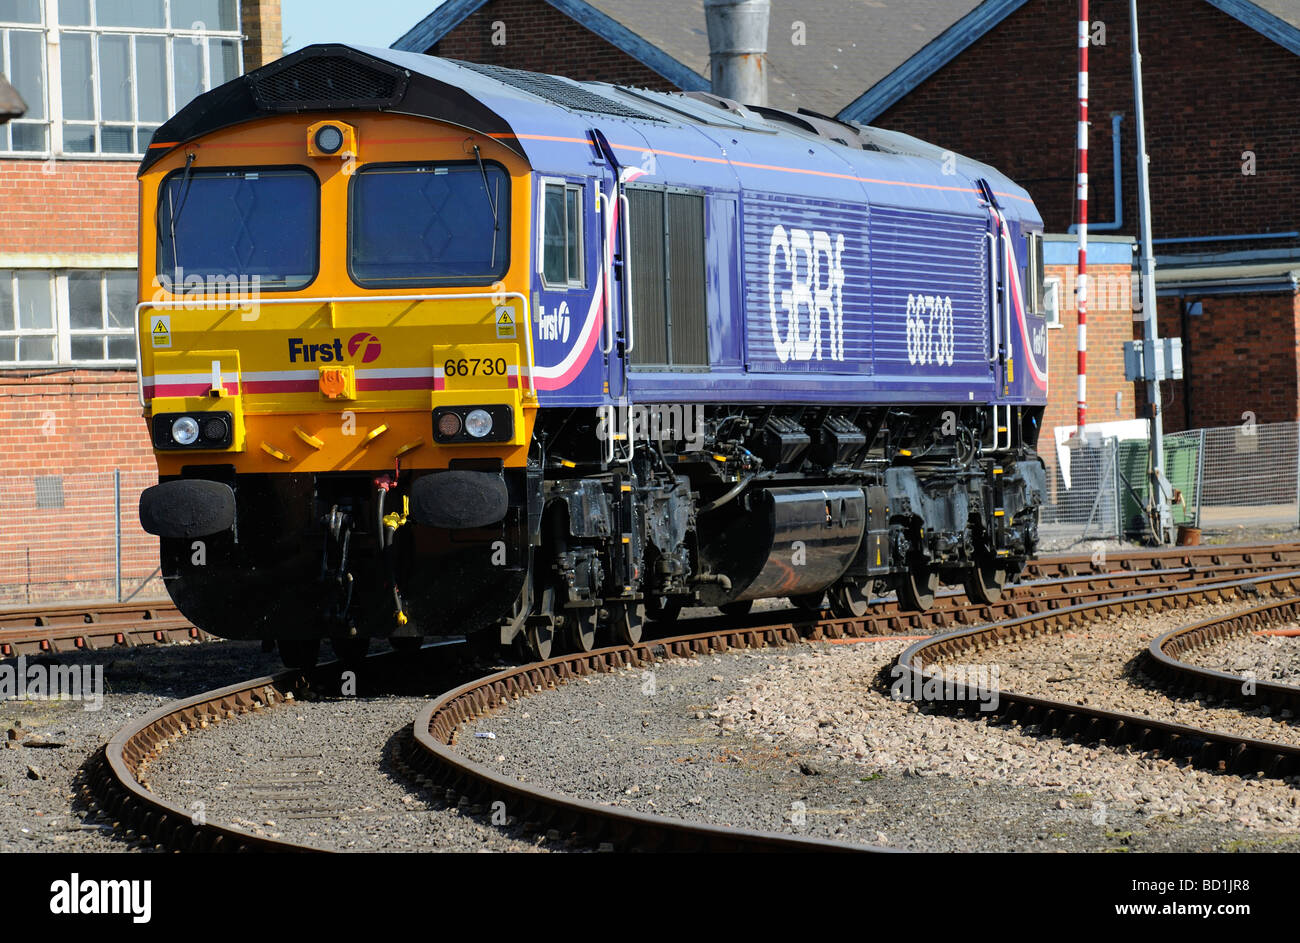 FIRST GBRf locomotive rolling stock of the FirstGroup plc freight operator Stock Photo